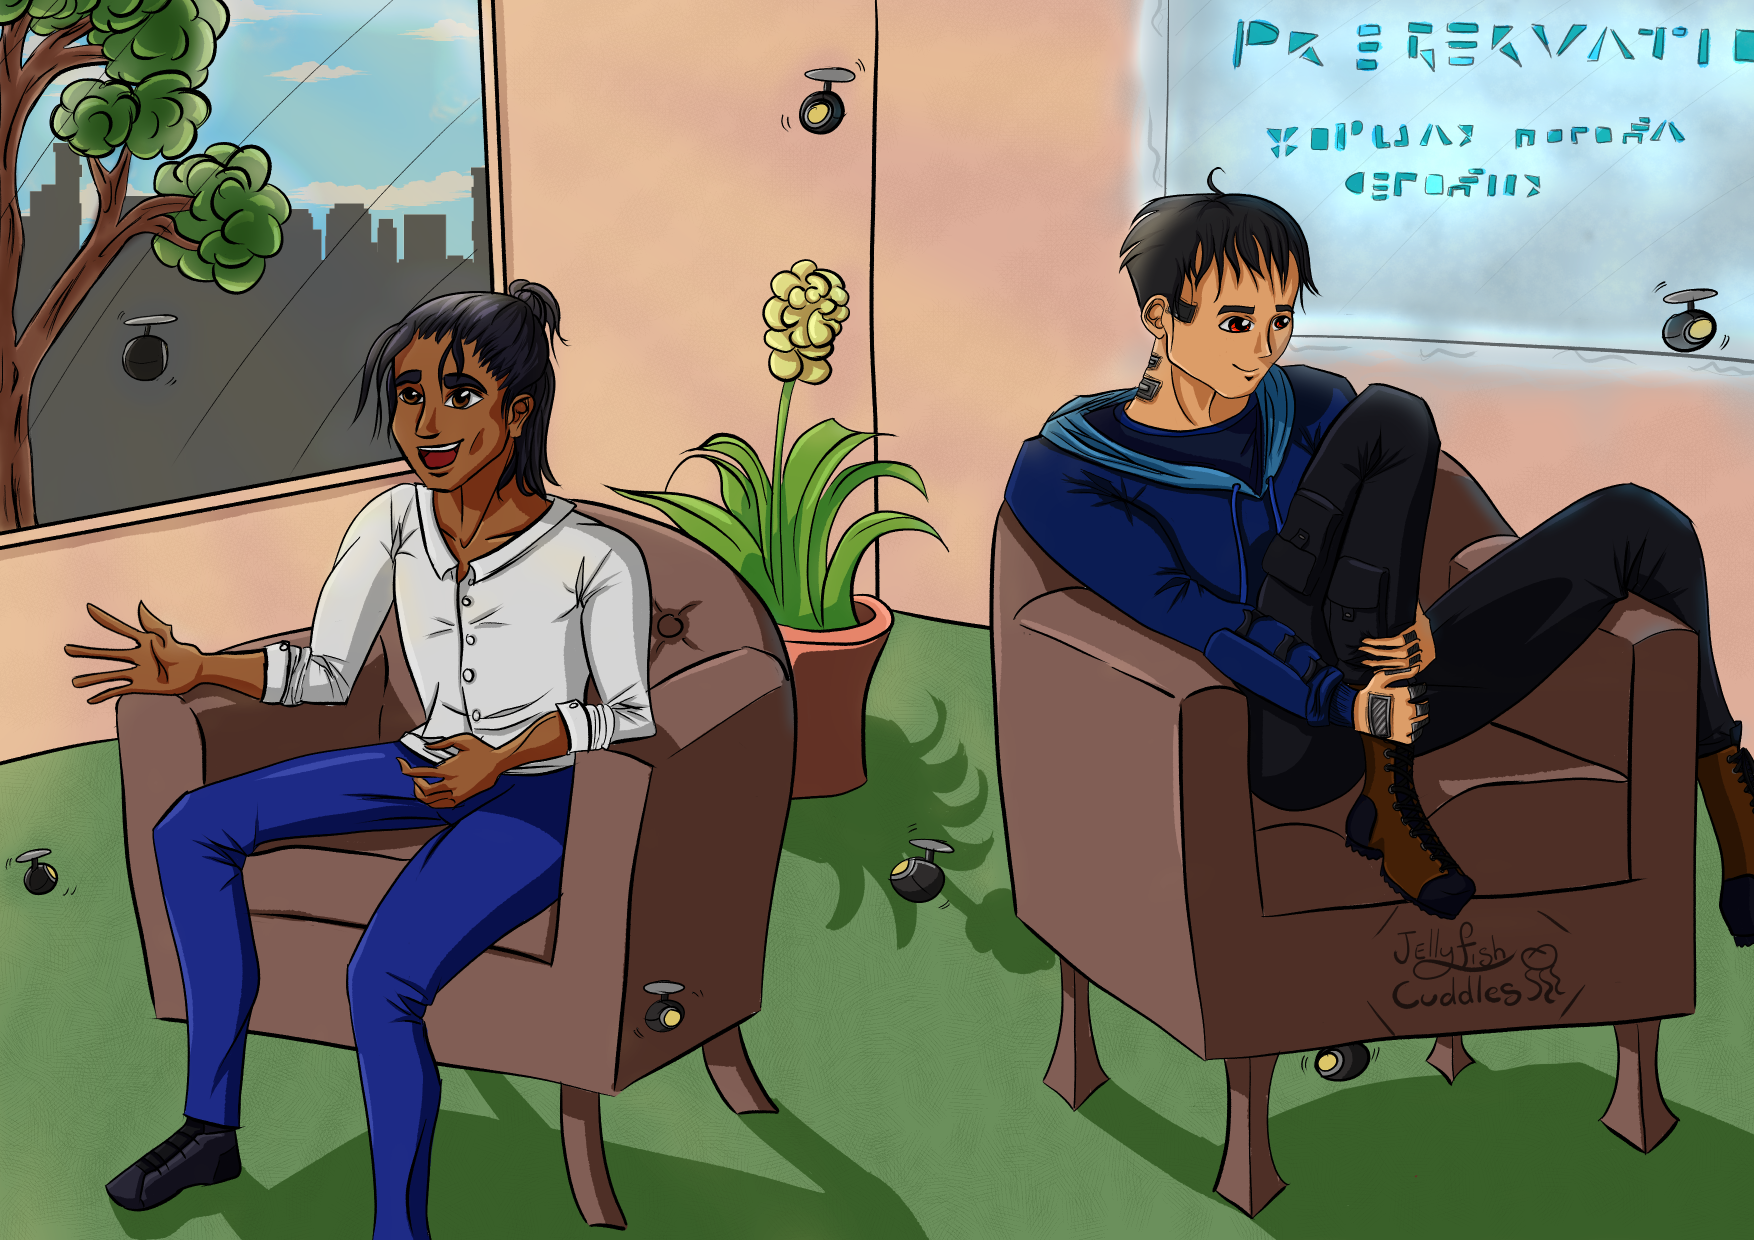 A stylised drawing of Ratthi and Murderbot in a warm, bright room on Preservation. They sit in comfortable chairs facing away from each other. Ratthi is gesturing excitedly as he talks to a drone. Murderbot is relaxed and curled up on the other chair with a small smile, one leg over the arm of its chair. There are seven drones in the room, most of which are focused on Ratthi, one of which is hiding under Murderbot's chair.